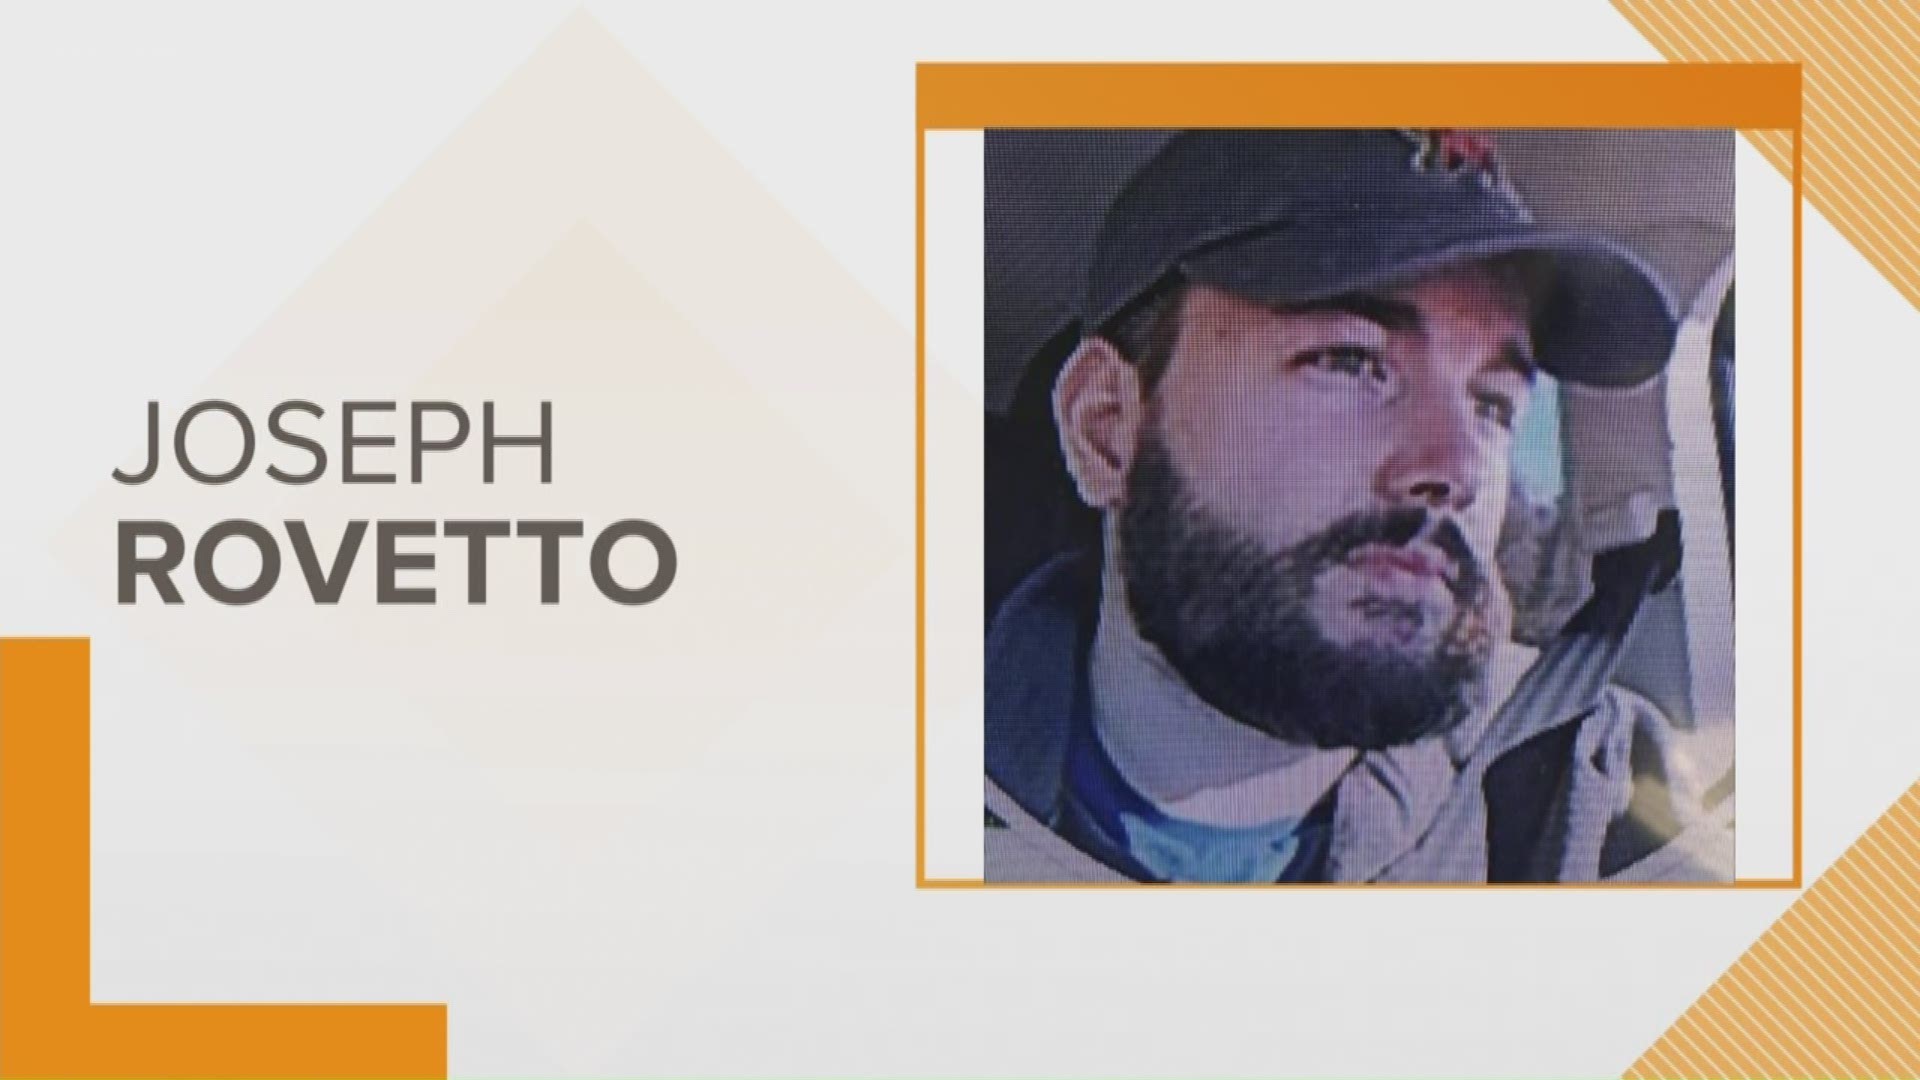 Horry County Police say 28-year-old Joseph Rovetto has not been seen since Sunday morning.